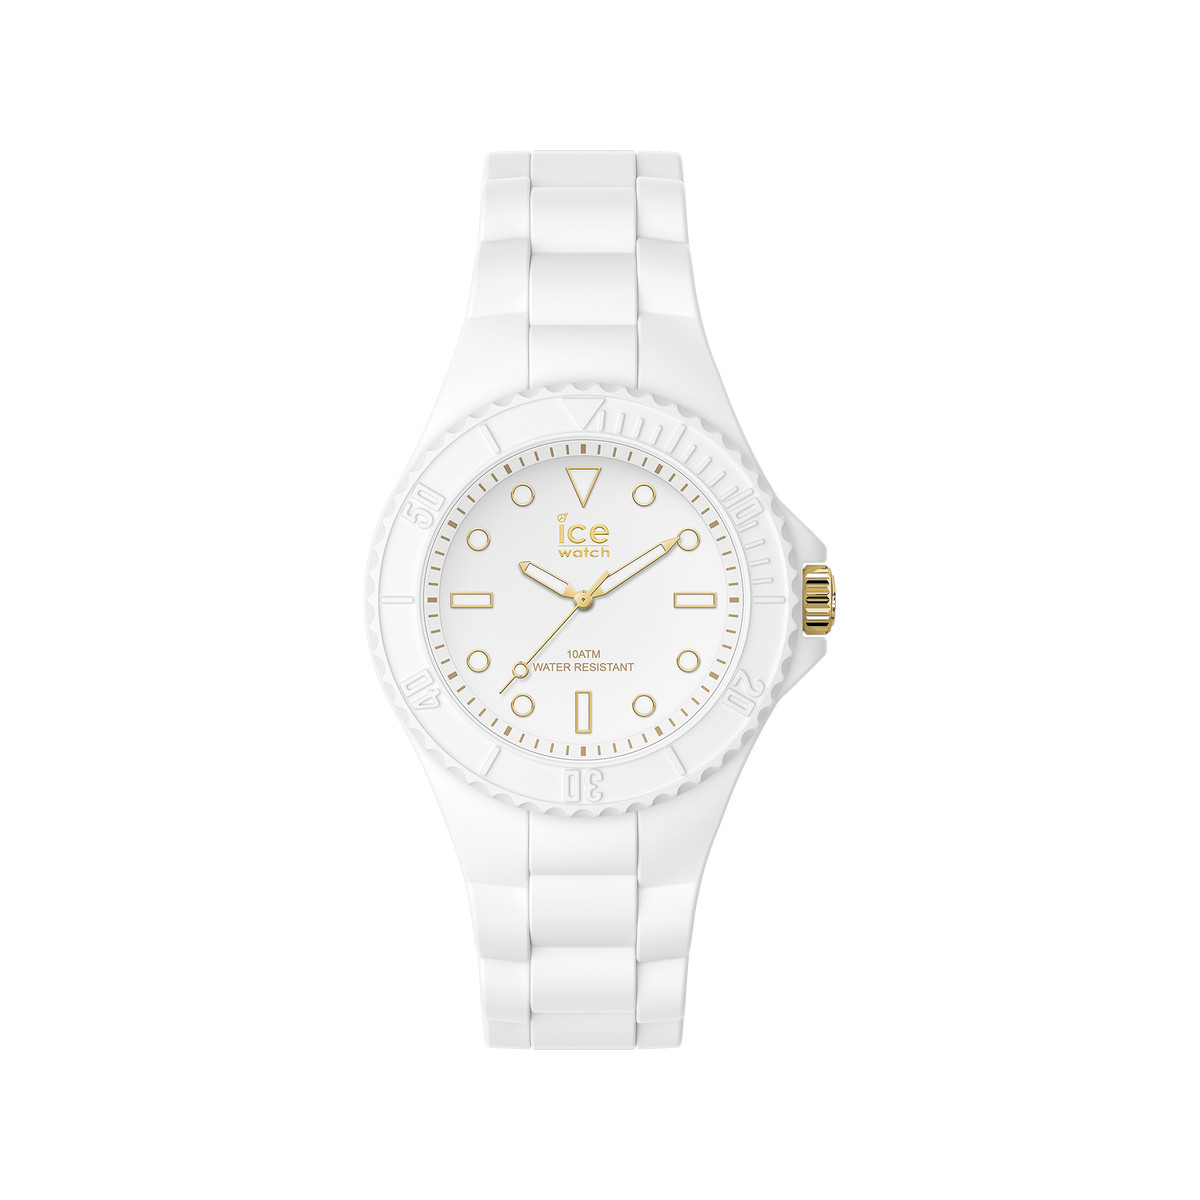 Montre Ice Watch small femme plastique silicone blanc